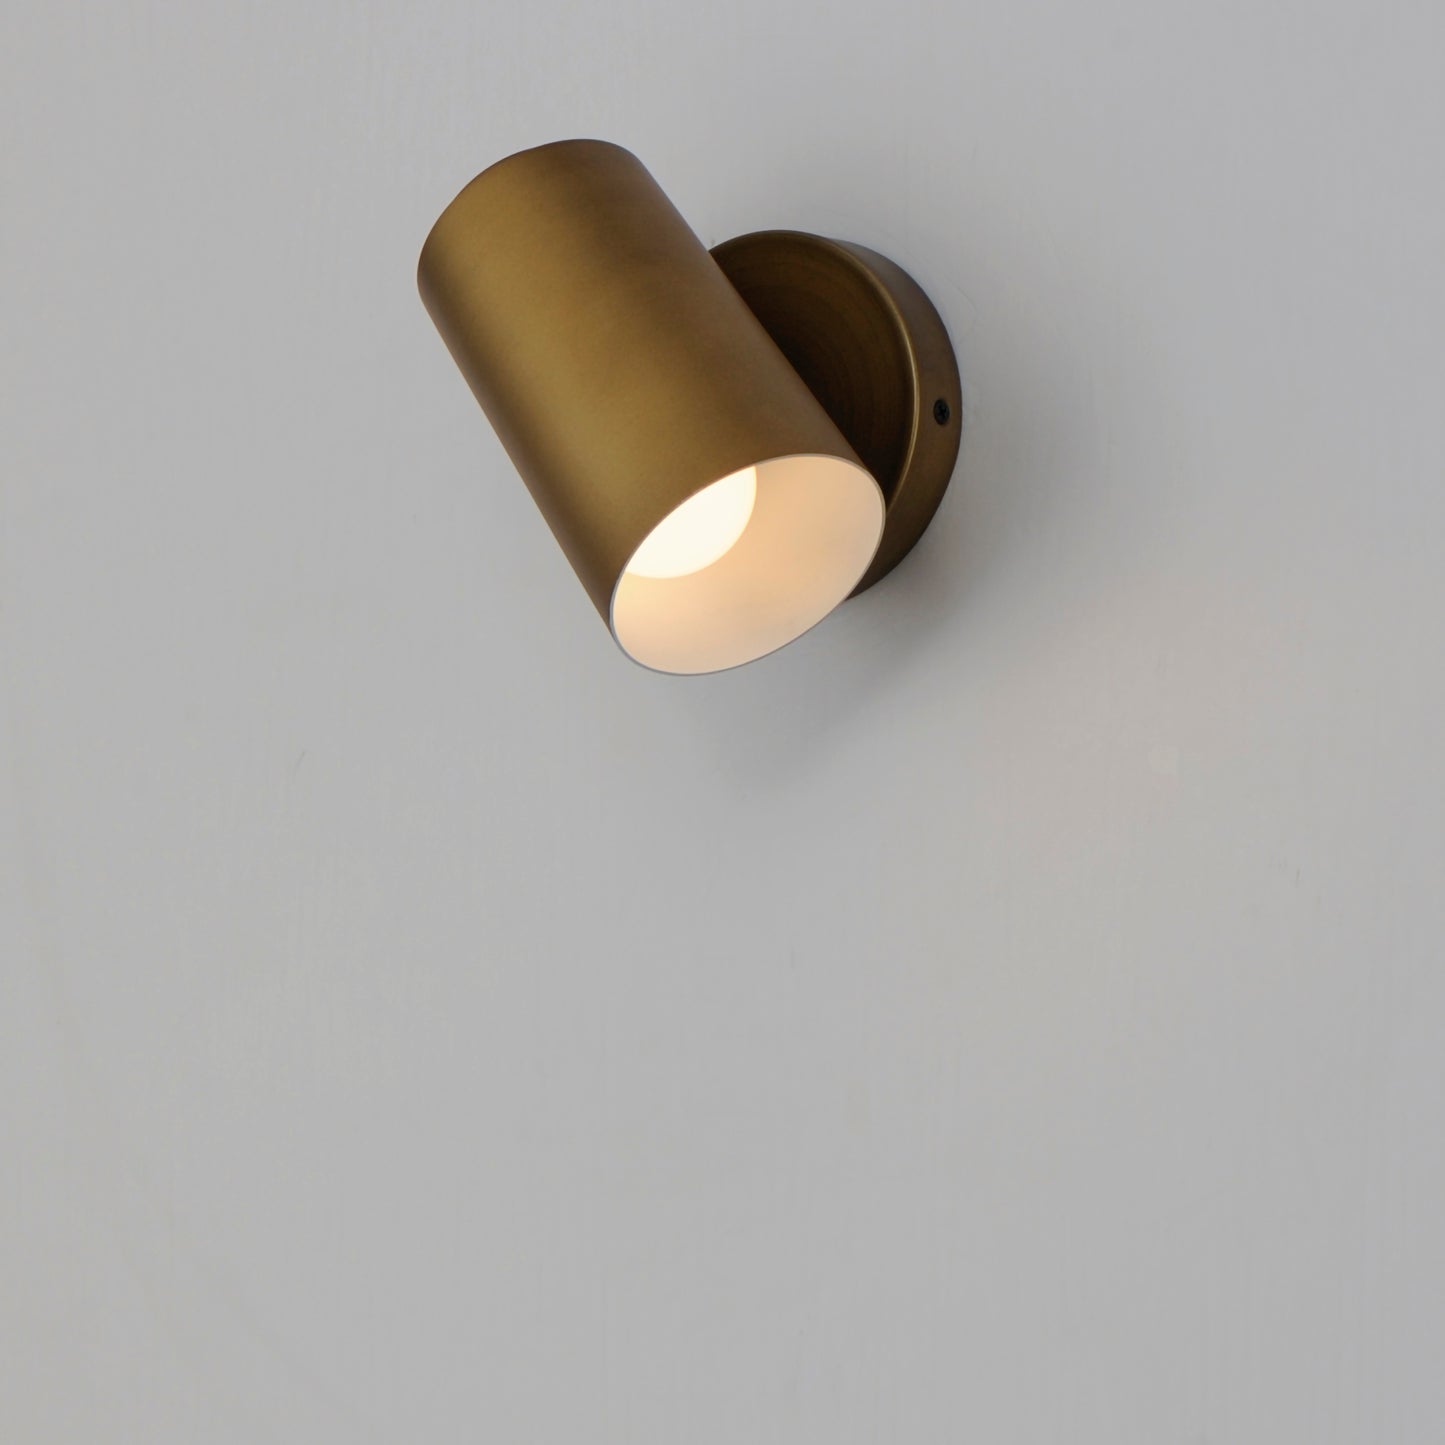 62001NAB - Spot Light 6.5" Outdoor Wall Sconce - Natural Aged Brass